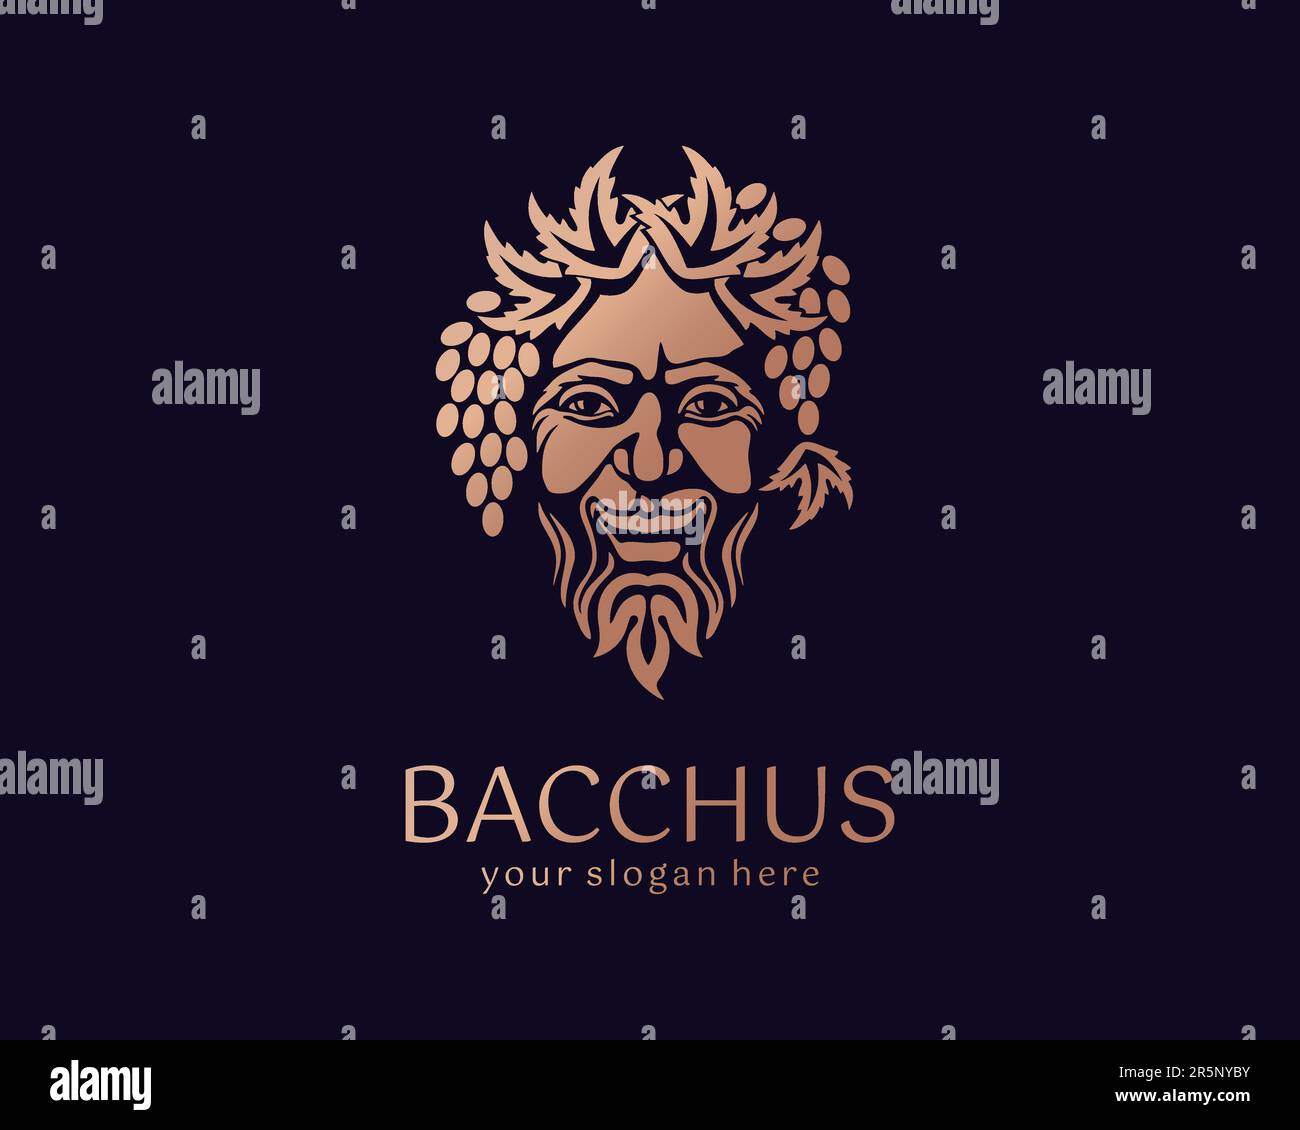 Logo Bacchus or Dionysus. Man face logo with grape berries and leaves. A style for winemakers or brewers. Sign for bar and restaurant. Modern logo Stock Vector